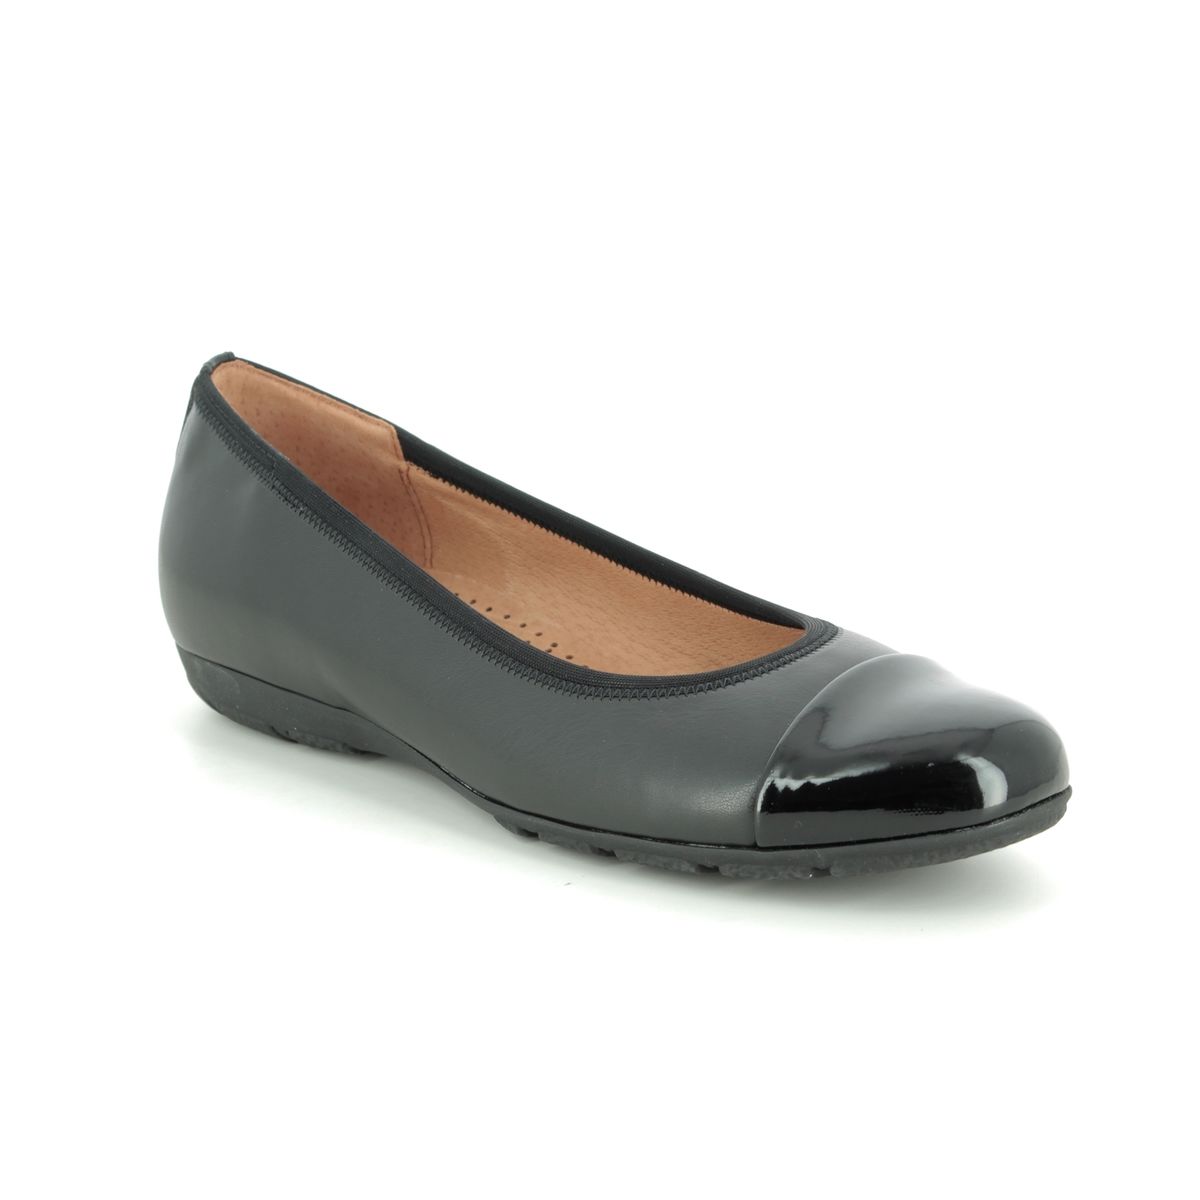 Gabor Raspa Black Womens pumps 94.161.57 in a Plain Leather in Size 6